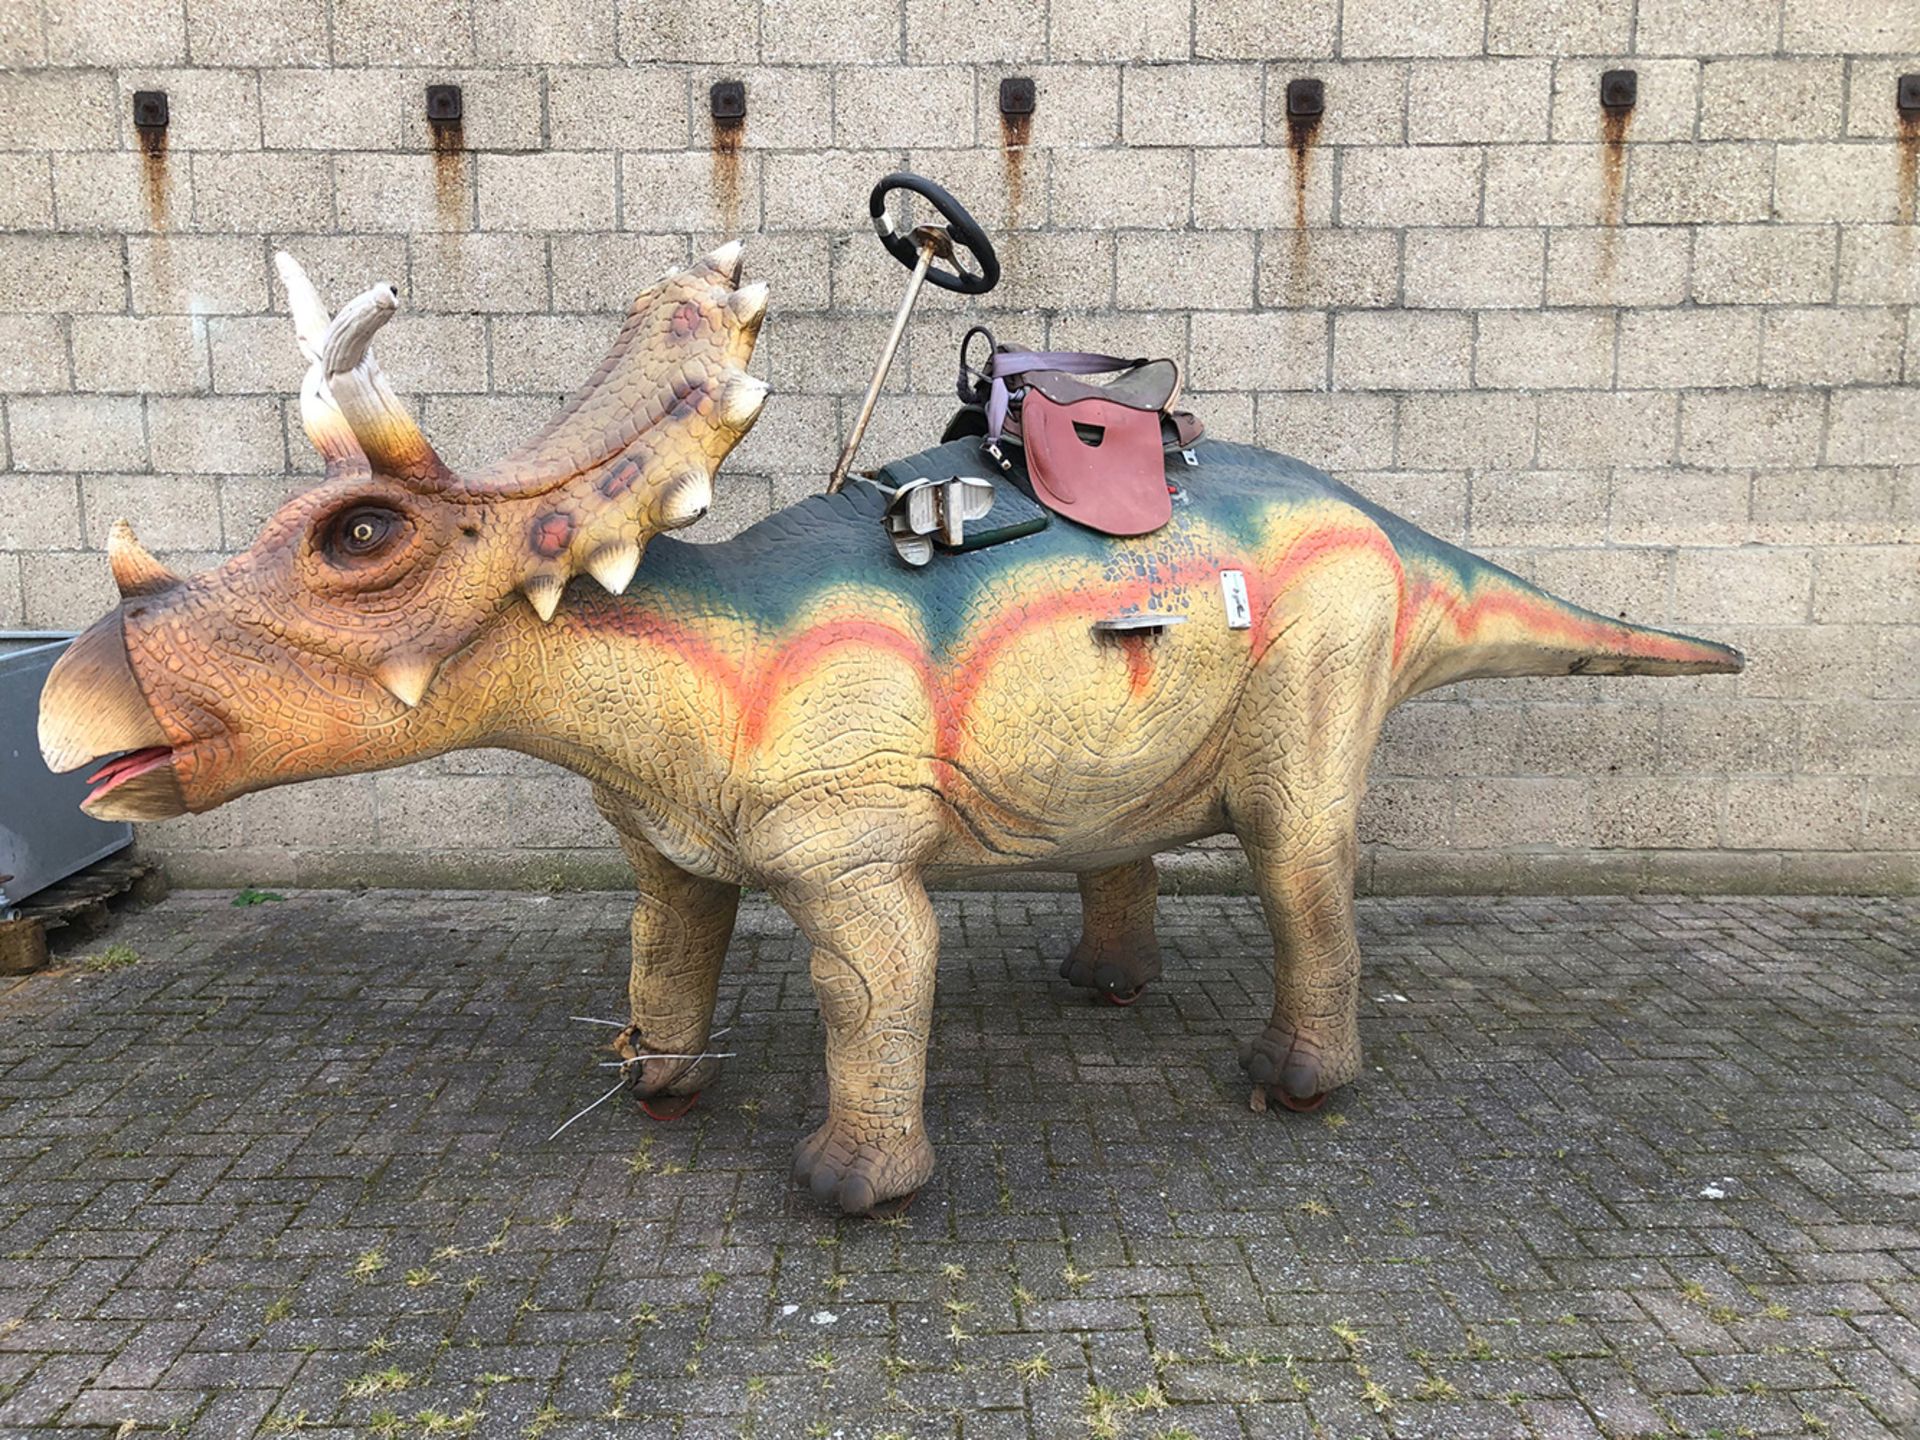 Gigantic Fairground Coin-Op Triceratops Attraction - Image 2 of 6